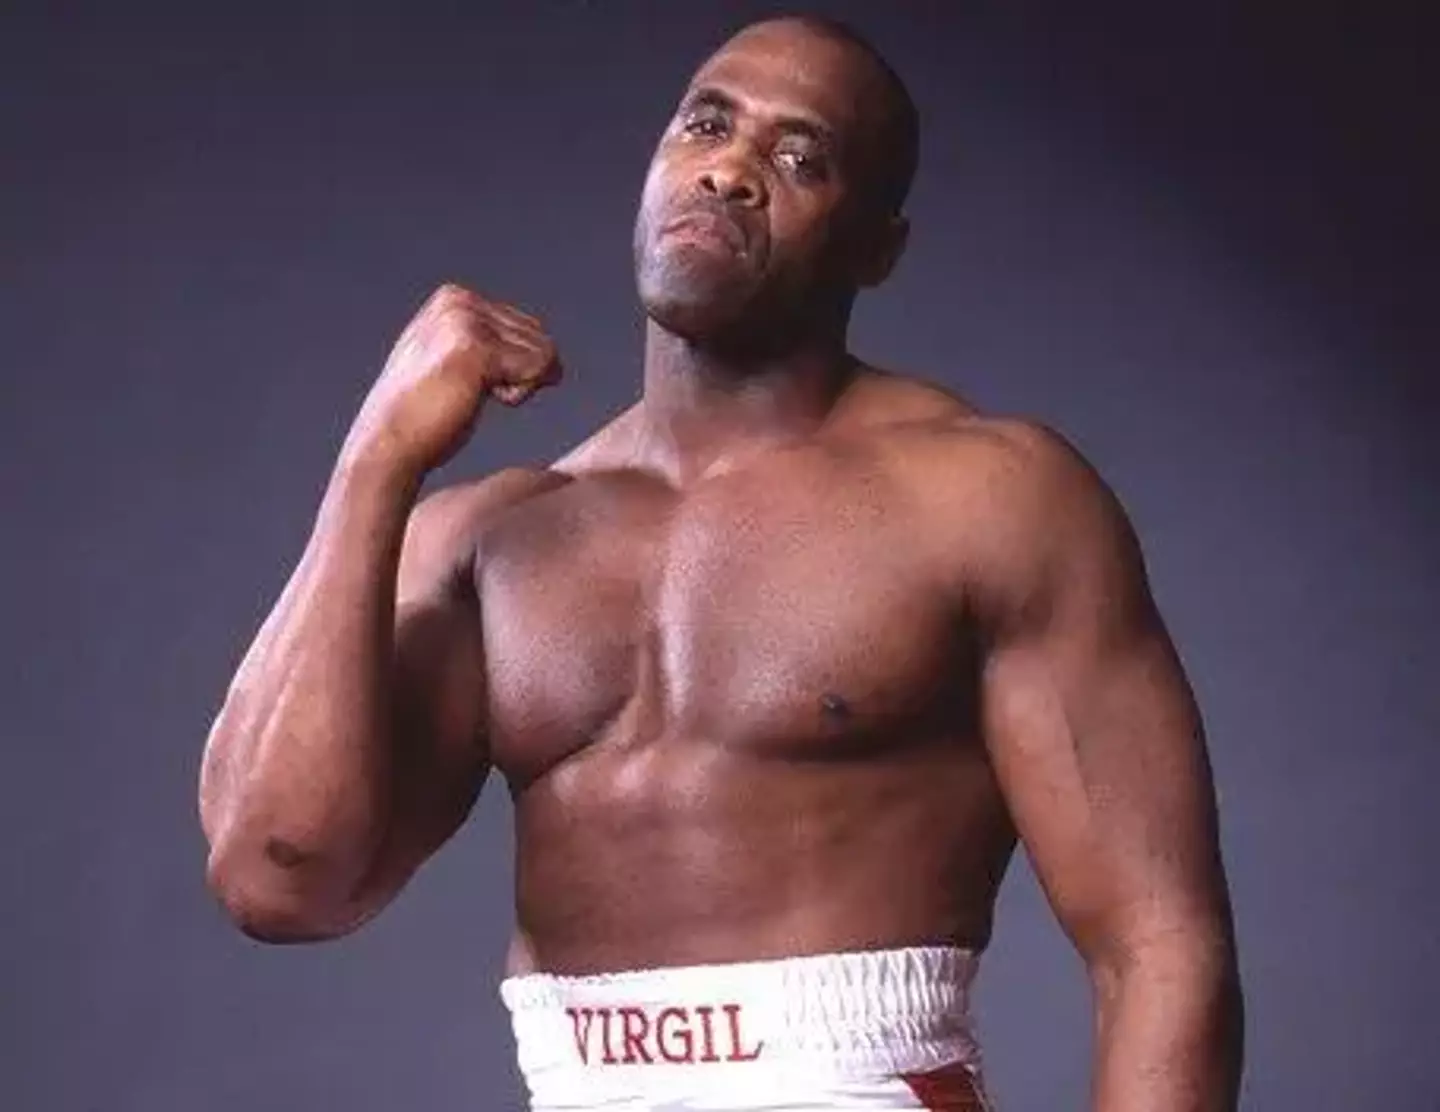 The WWE star made a name for himself in the late 80s and early 90s.